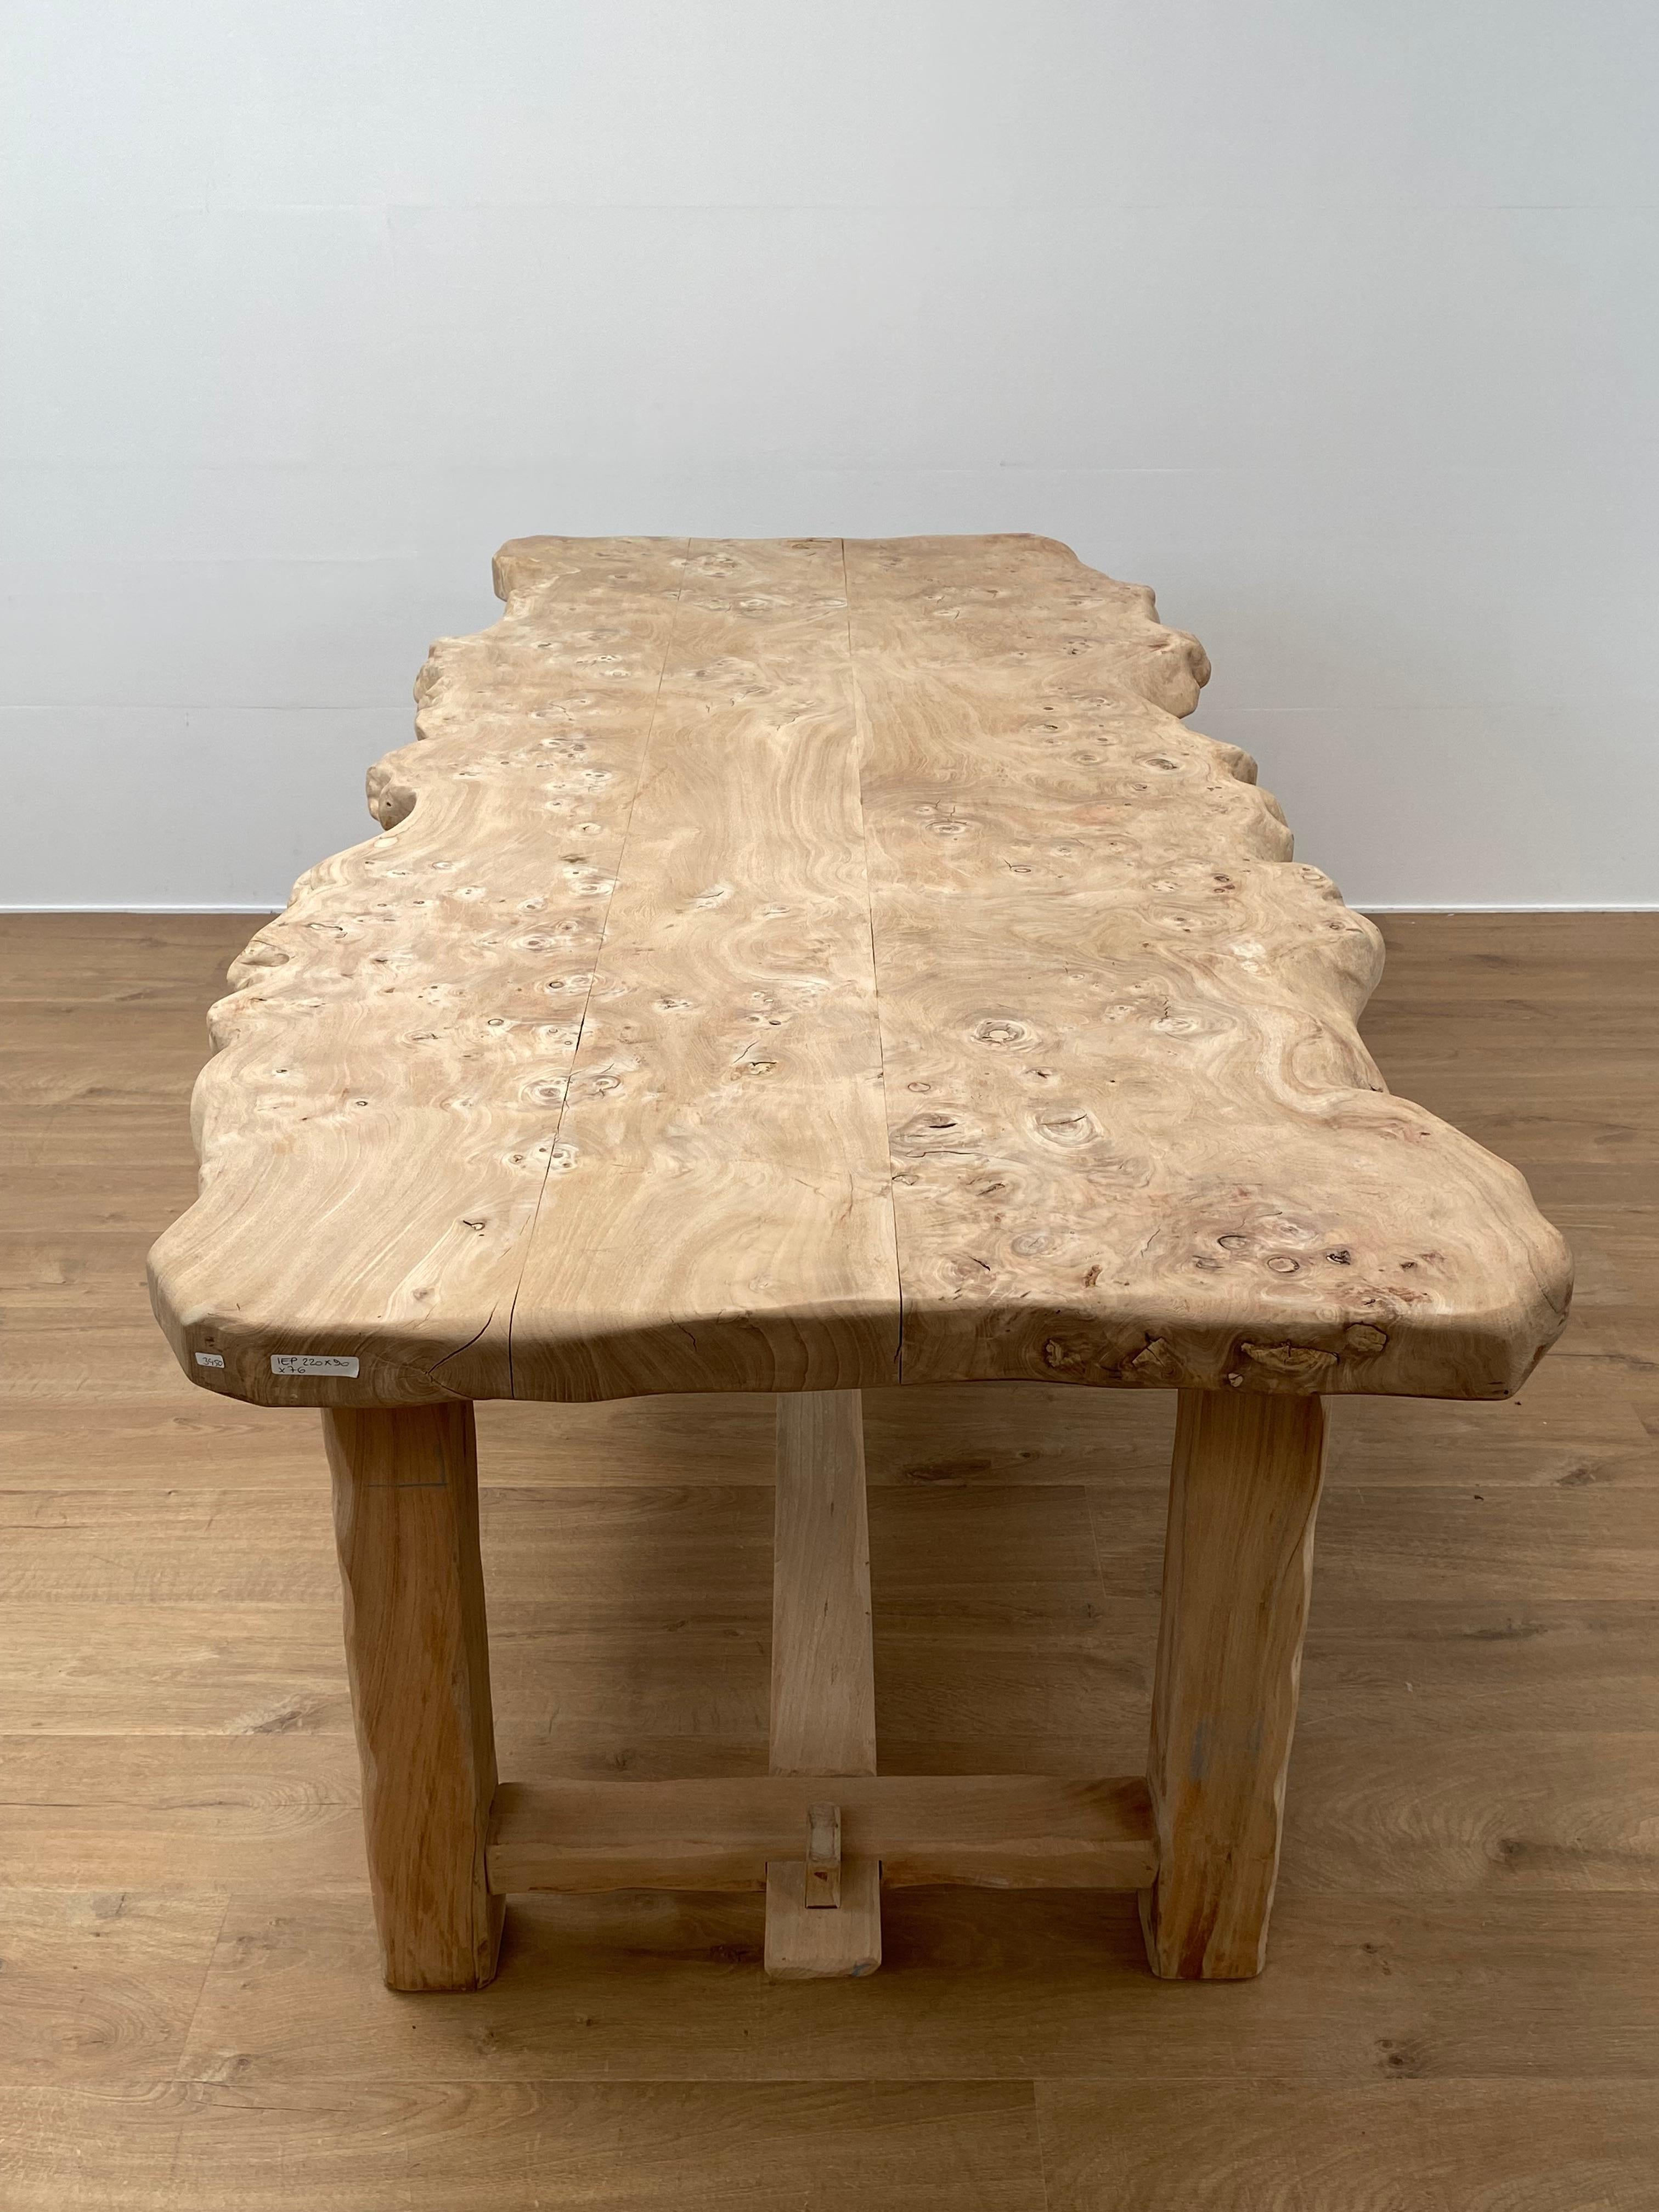 Brutalist, Rustic Wooden Table In Excellent Condition For Sale In Schellebelle, BE